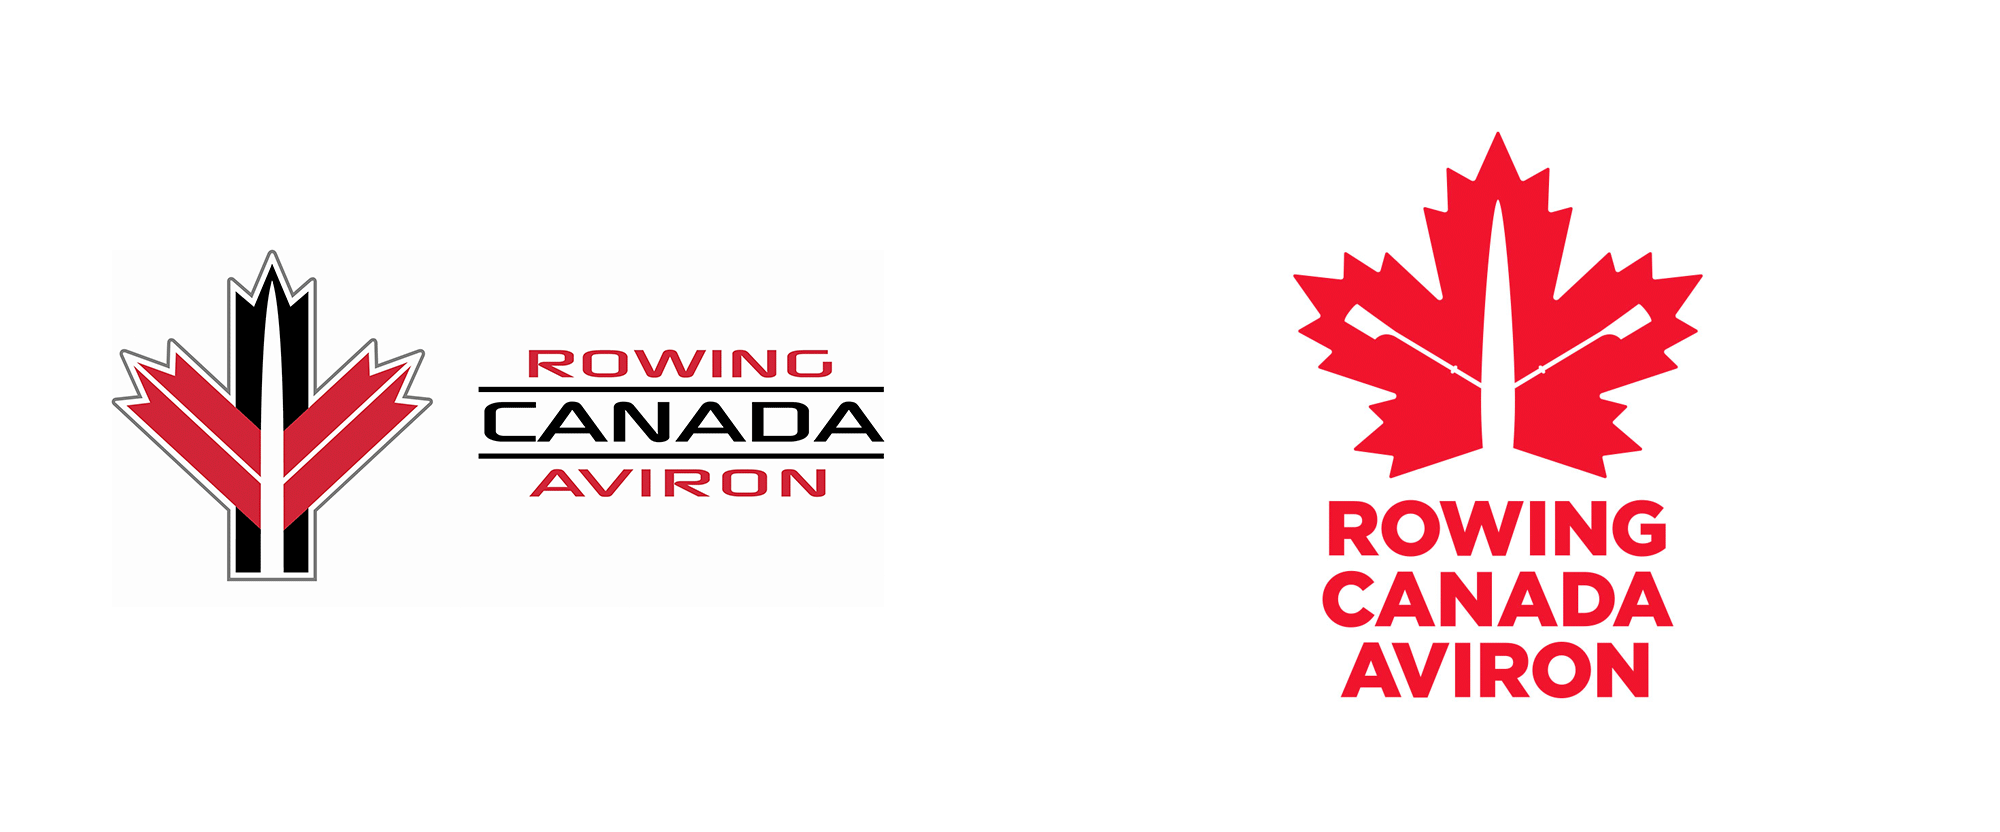 New Logo for Rowing Canada Aviron by They